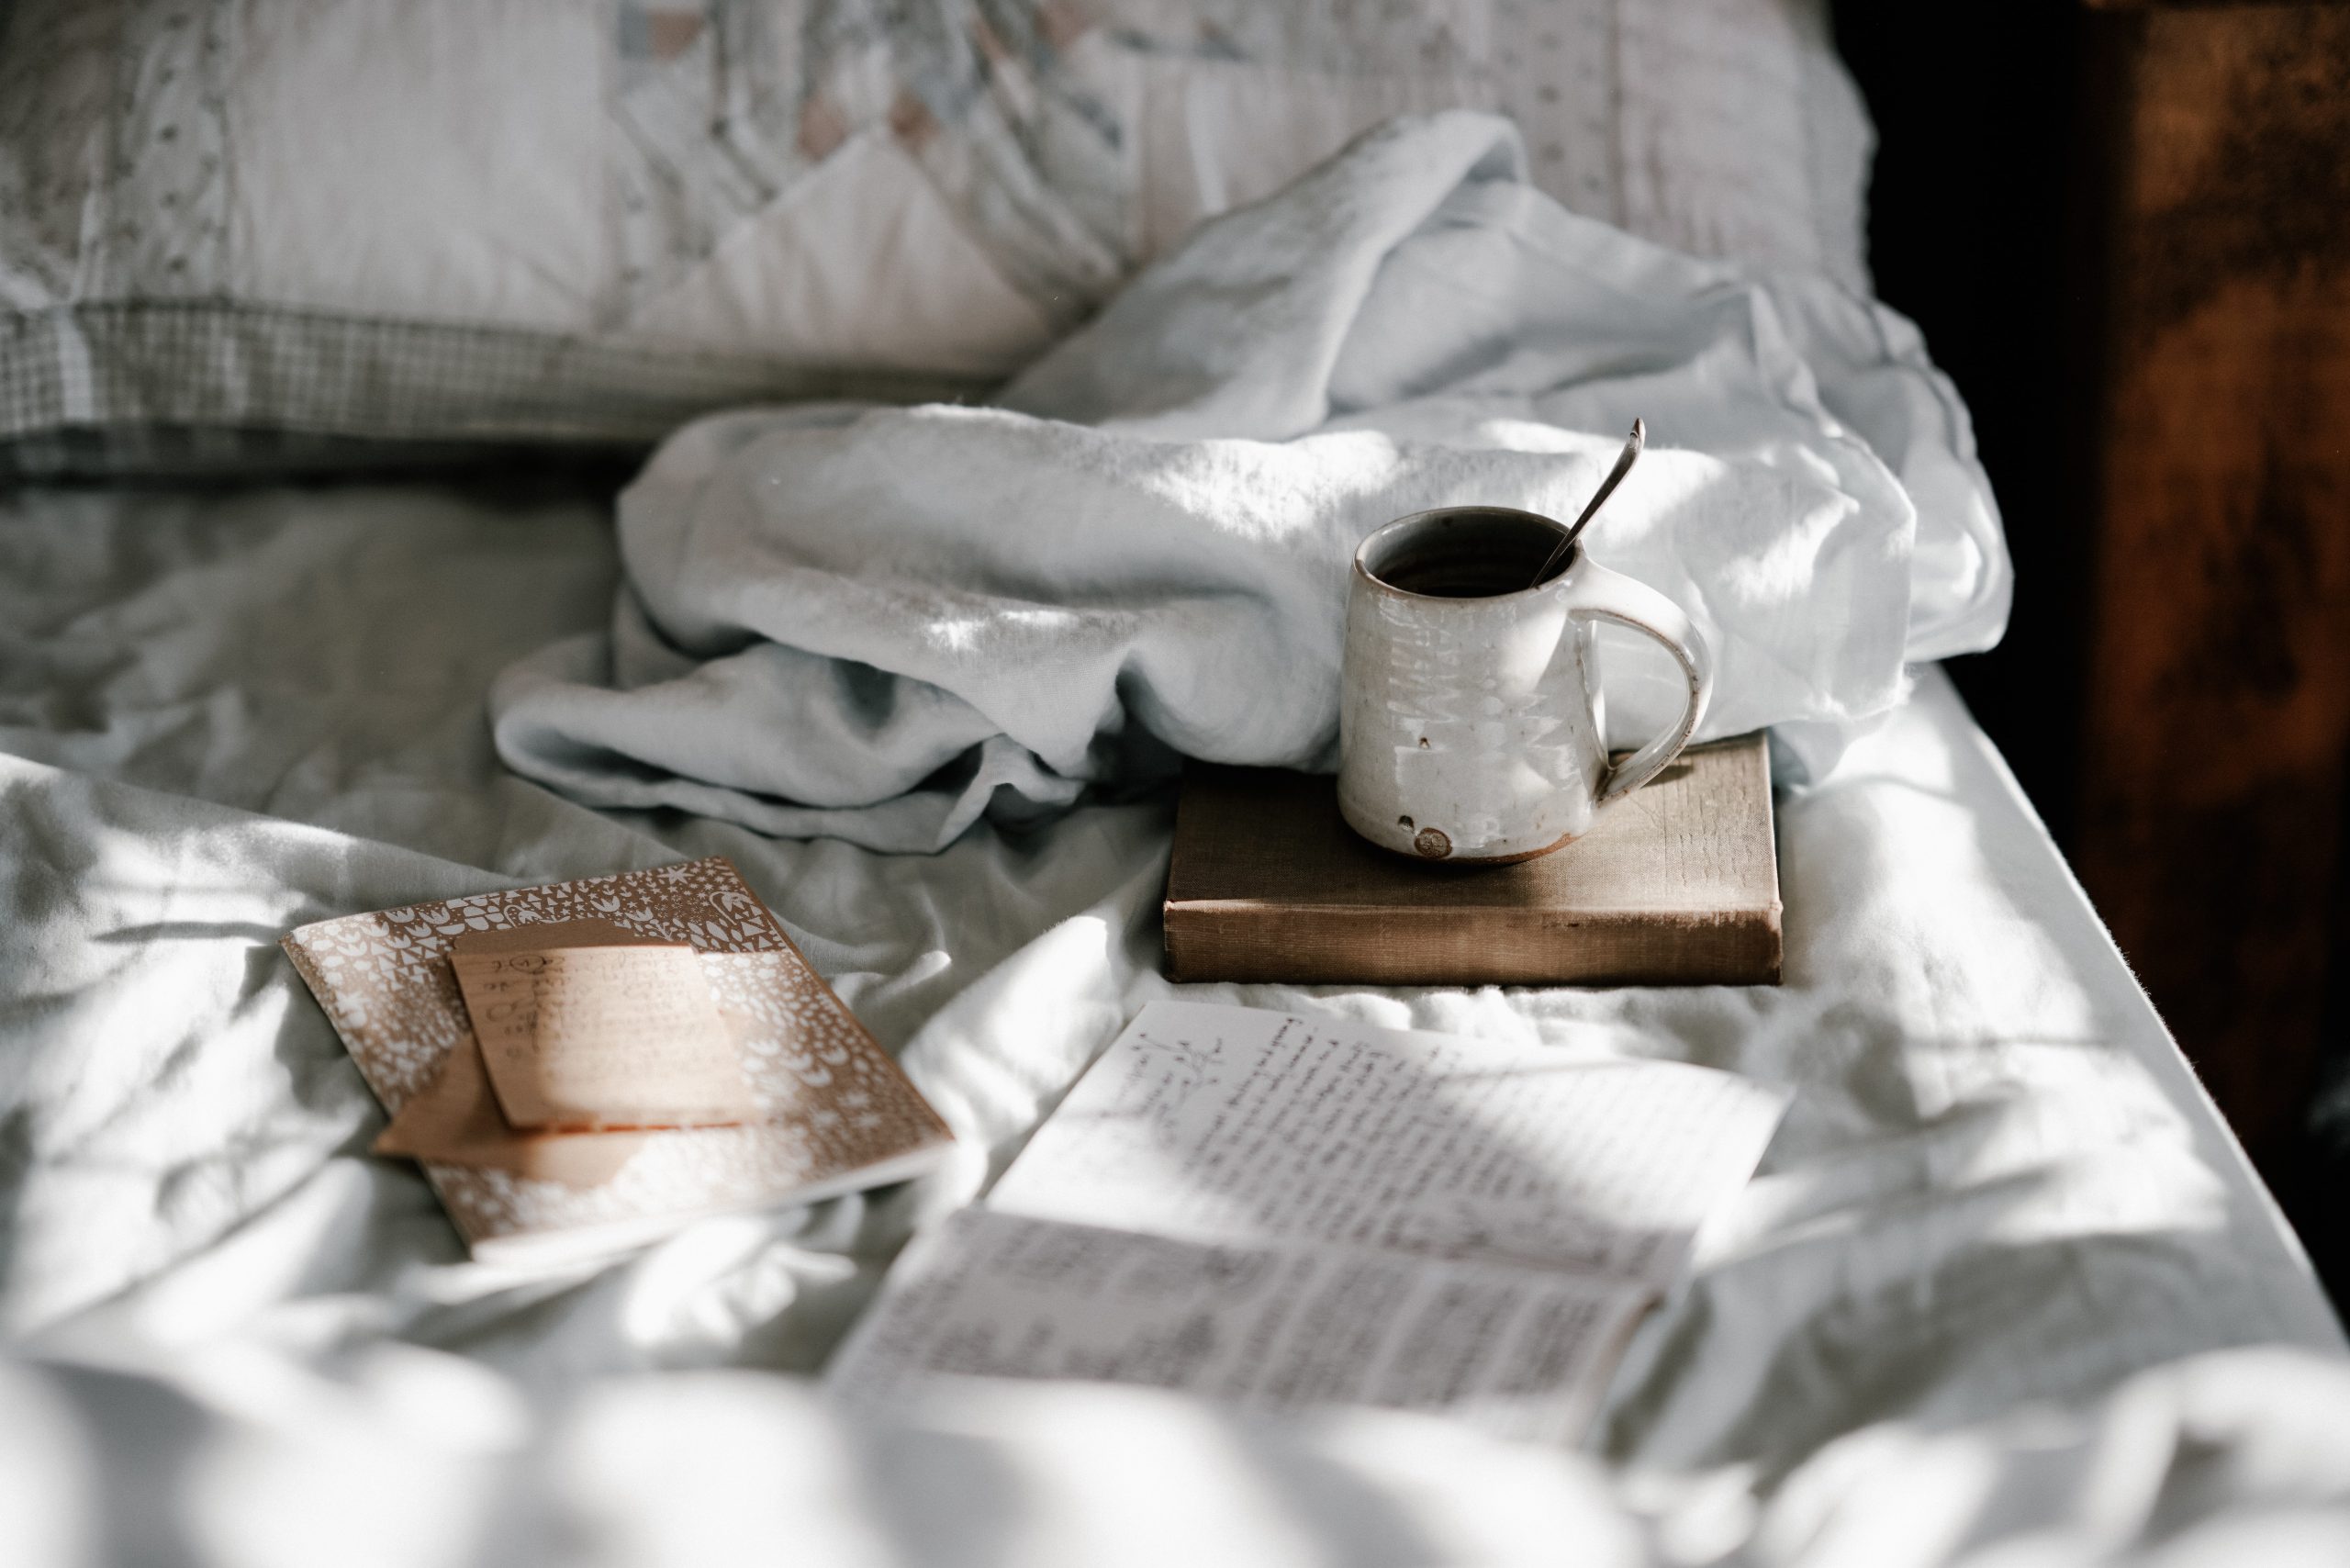 relaxing scene of a bed with an open journal and some tea